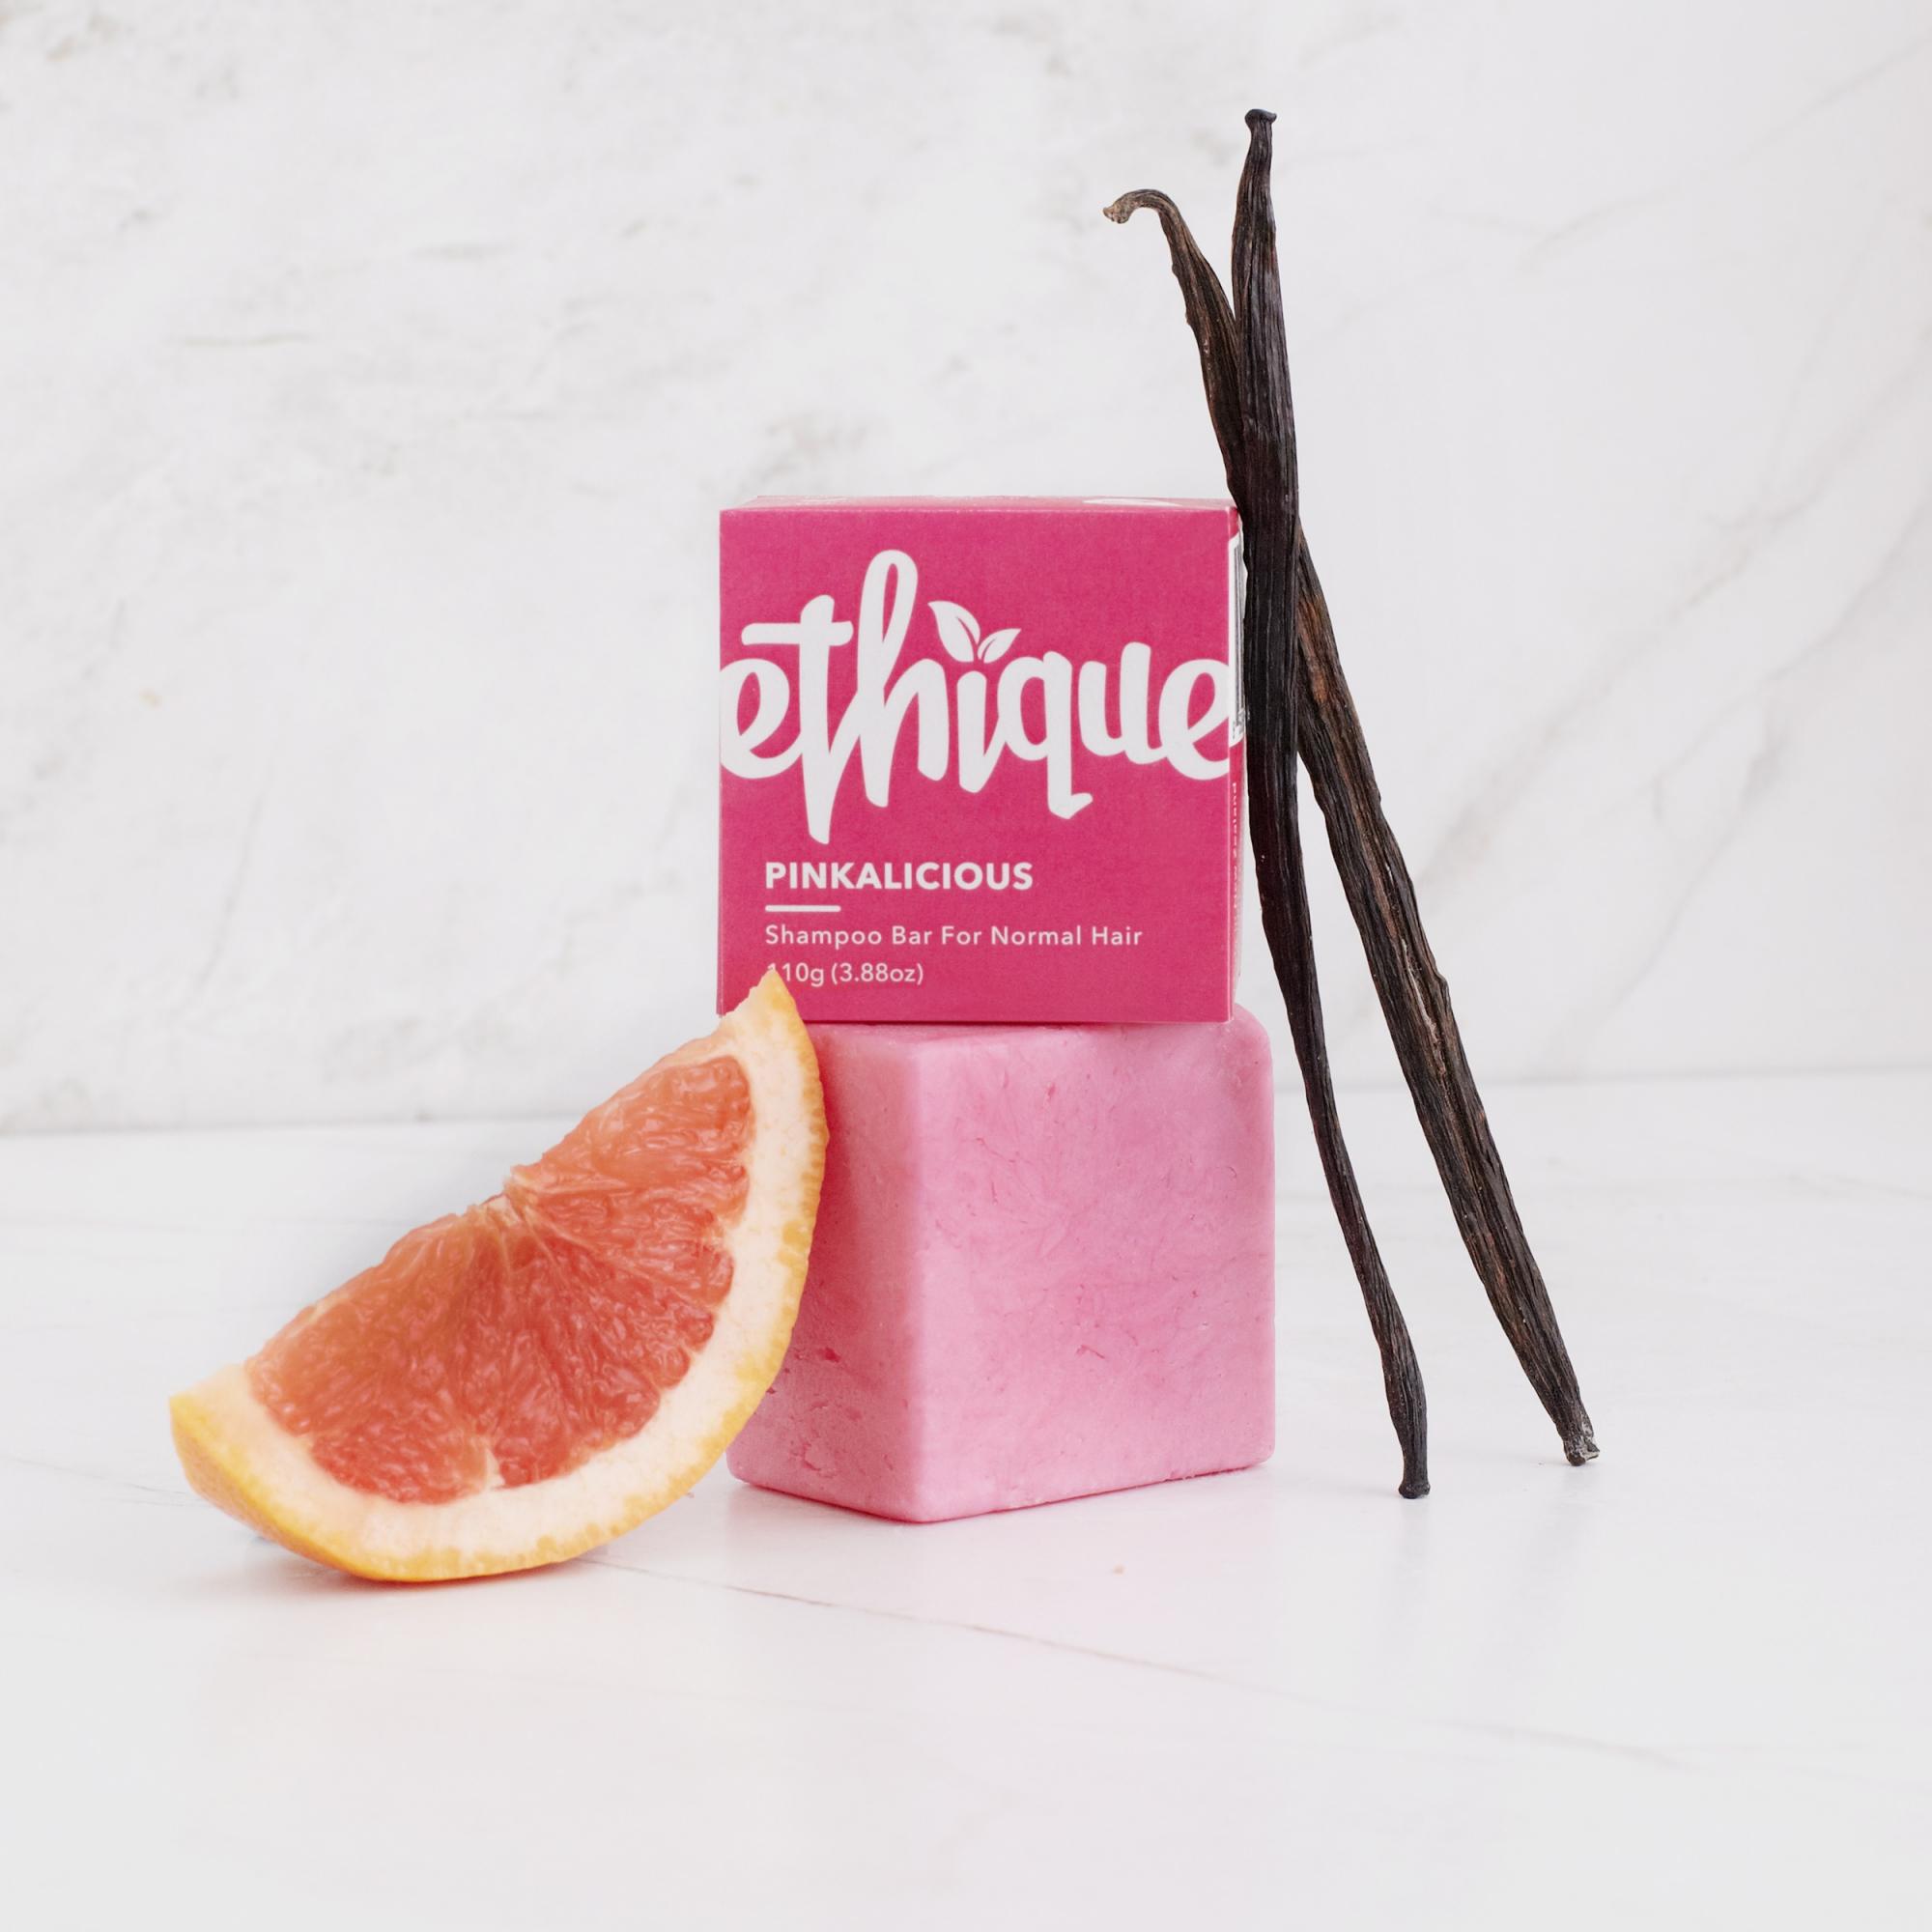 Ethique waterless shampoo bar, ethical and sustainable gift guide